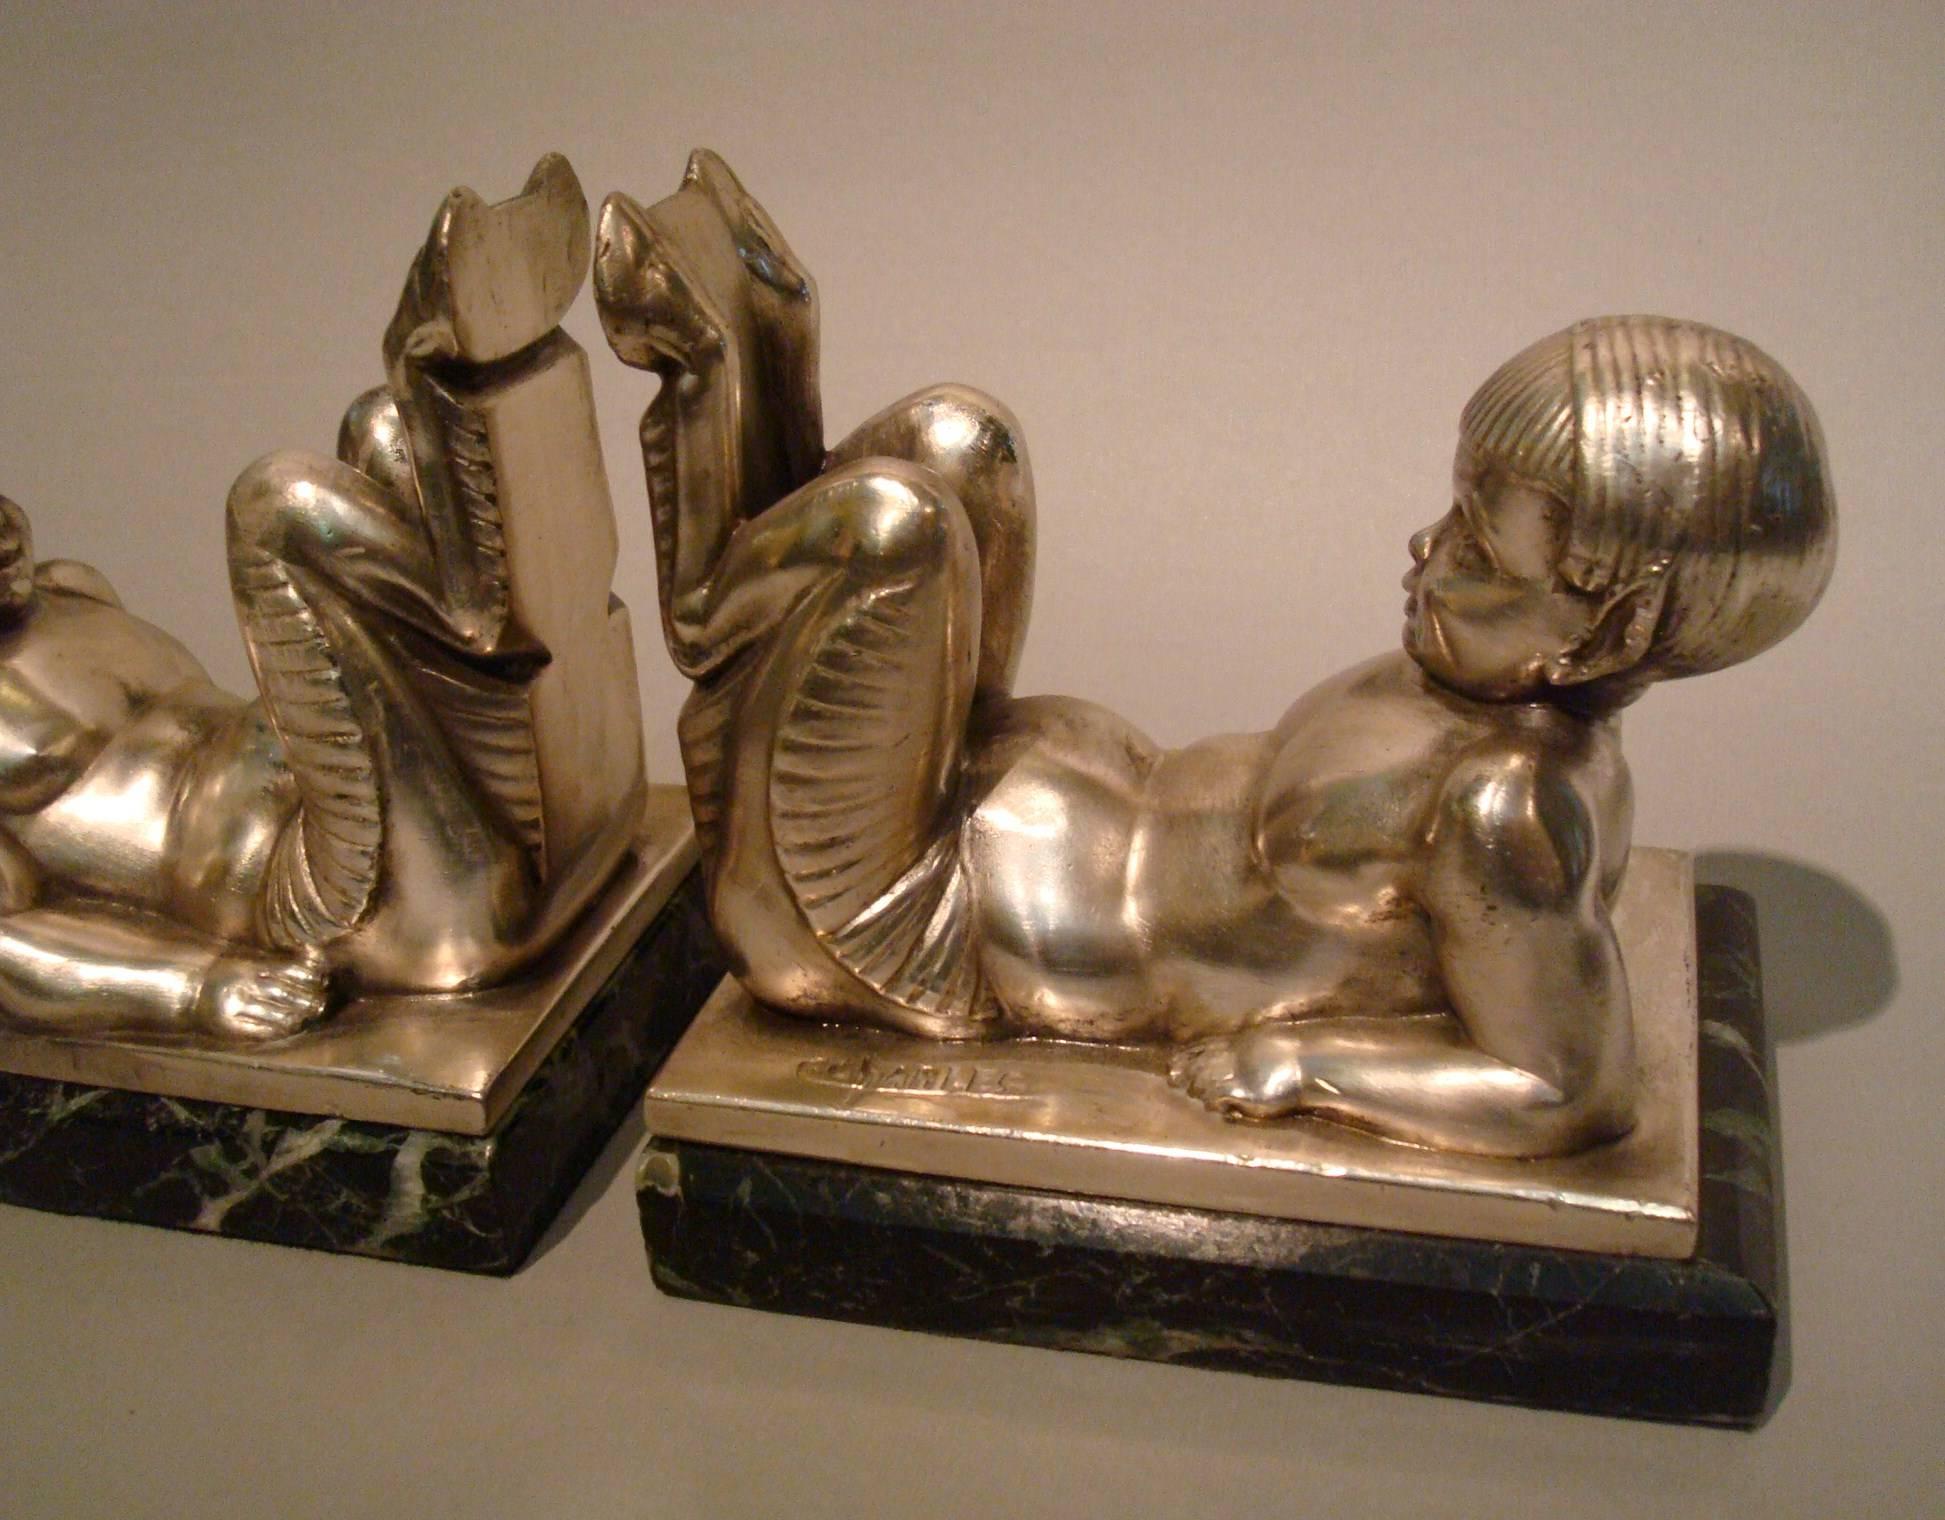 French Art Deco bookends Young Satyrs by C. Charles on marble base, 1930
Lovely pair of Art Deco bookends with lying young satyrs by the French artist C. Charles. These wonderful, playful silver plated spelter satyr bookends were made by the Le